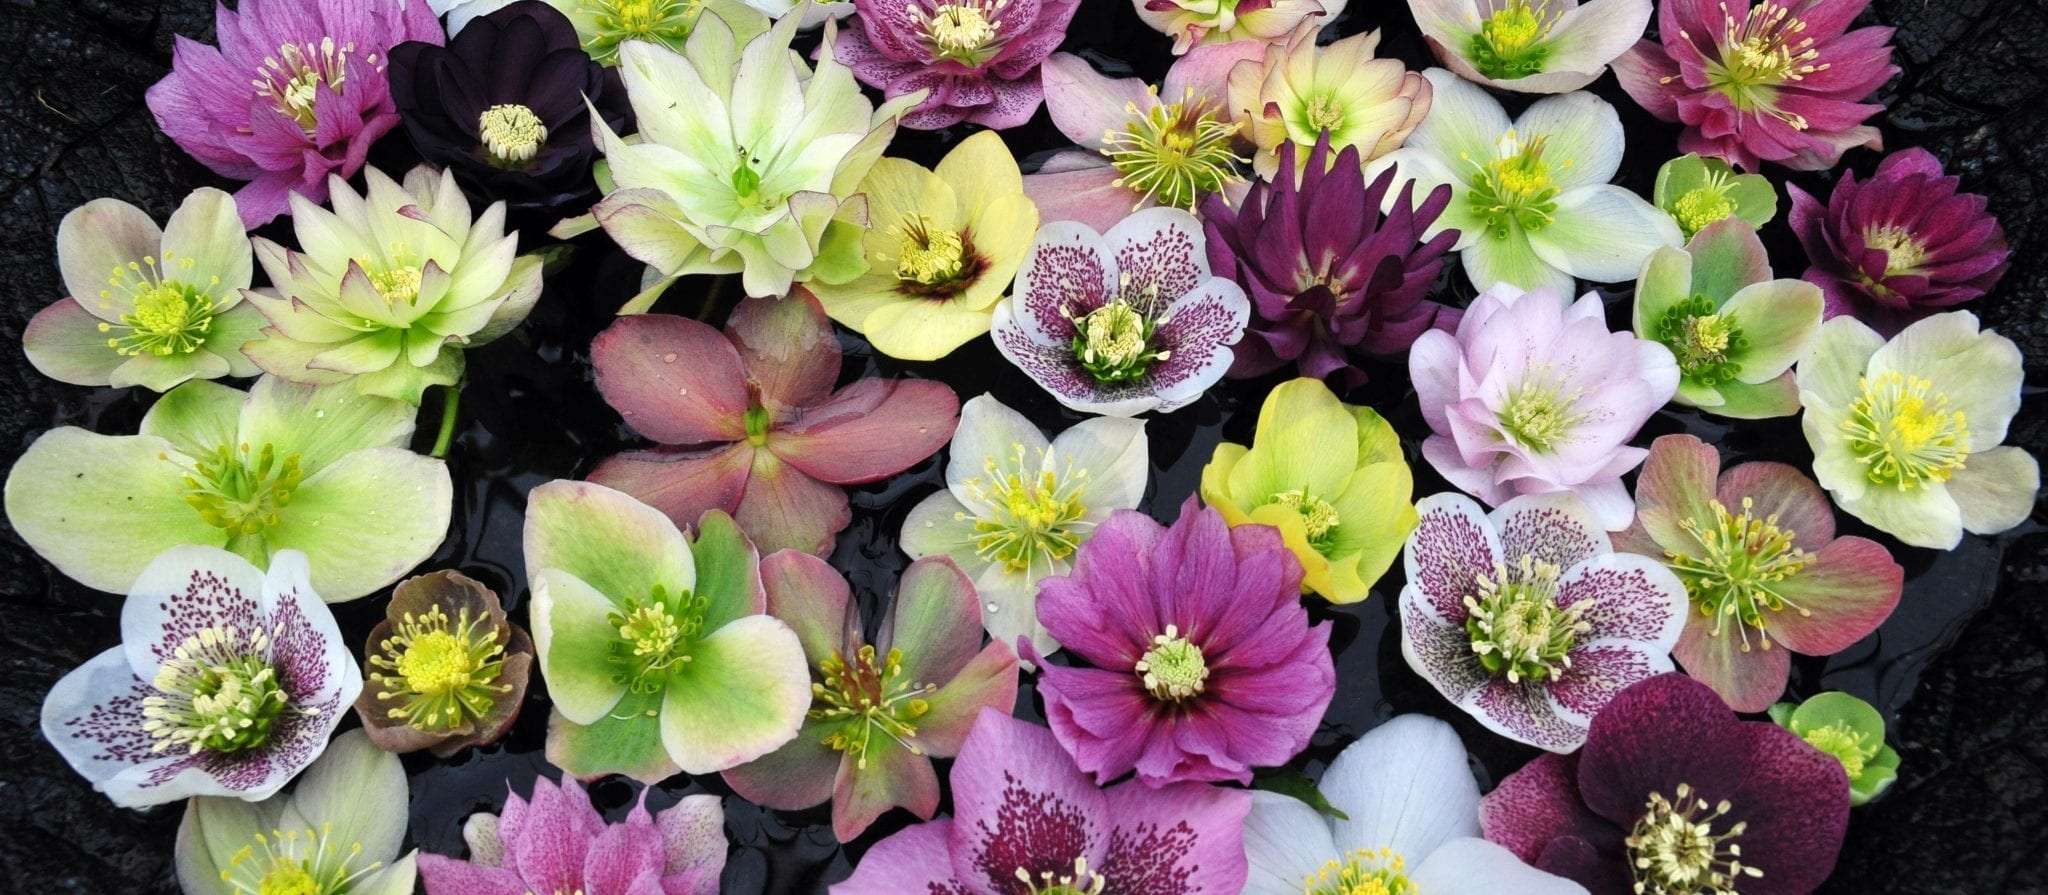 all about hellebores - phoenix perennials and specialty plants